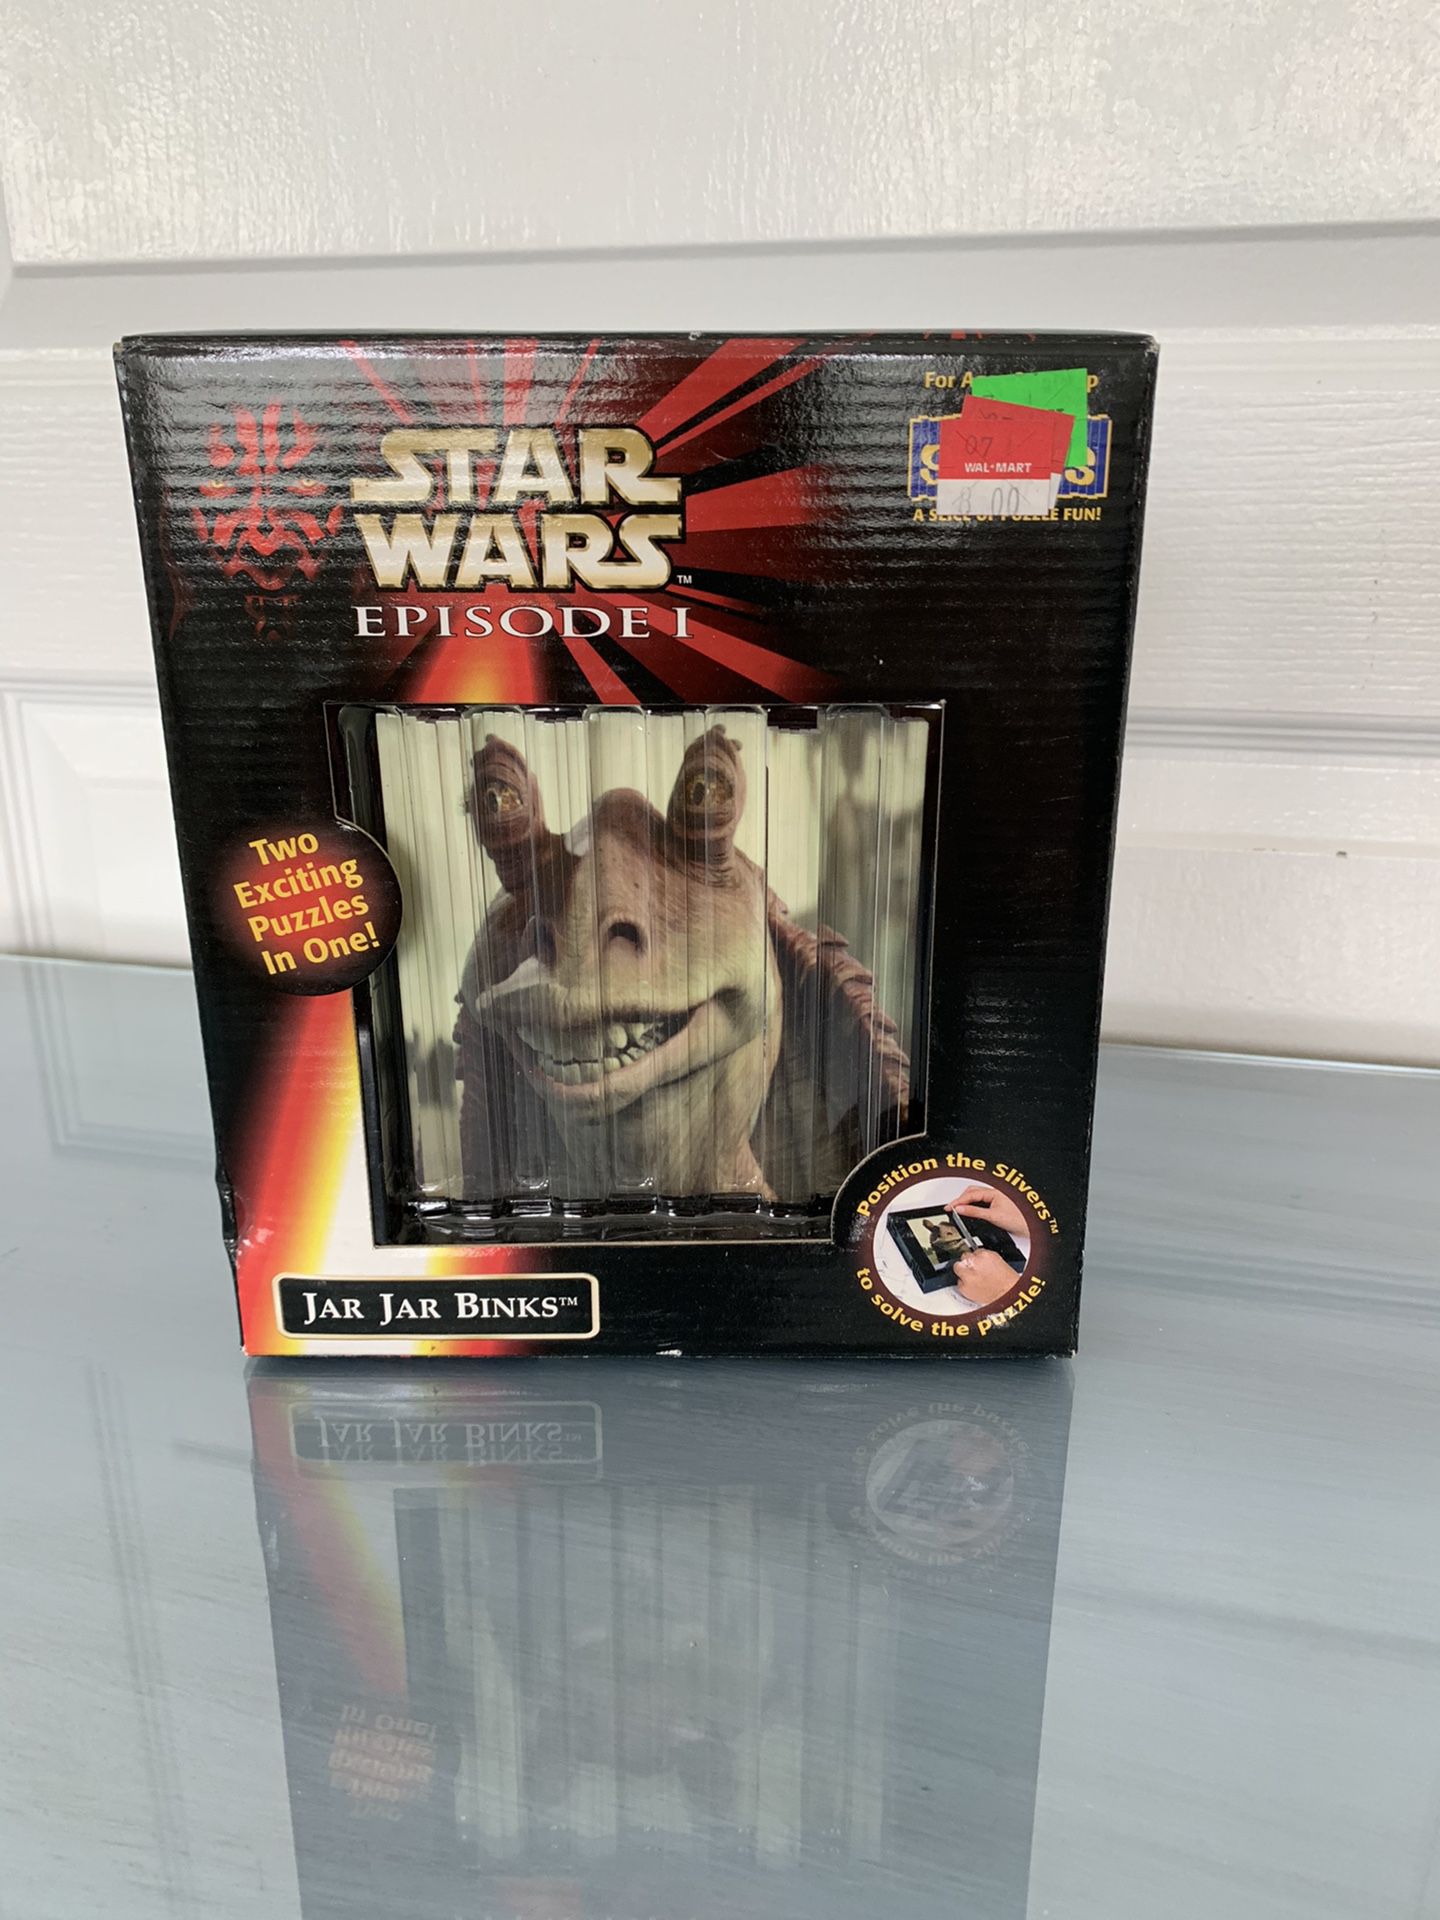 NWT Star Wars puzzle game